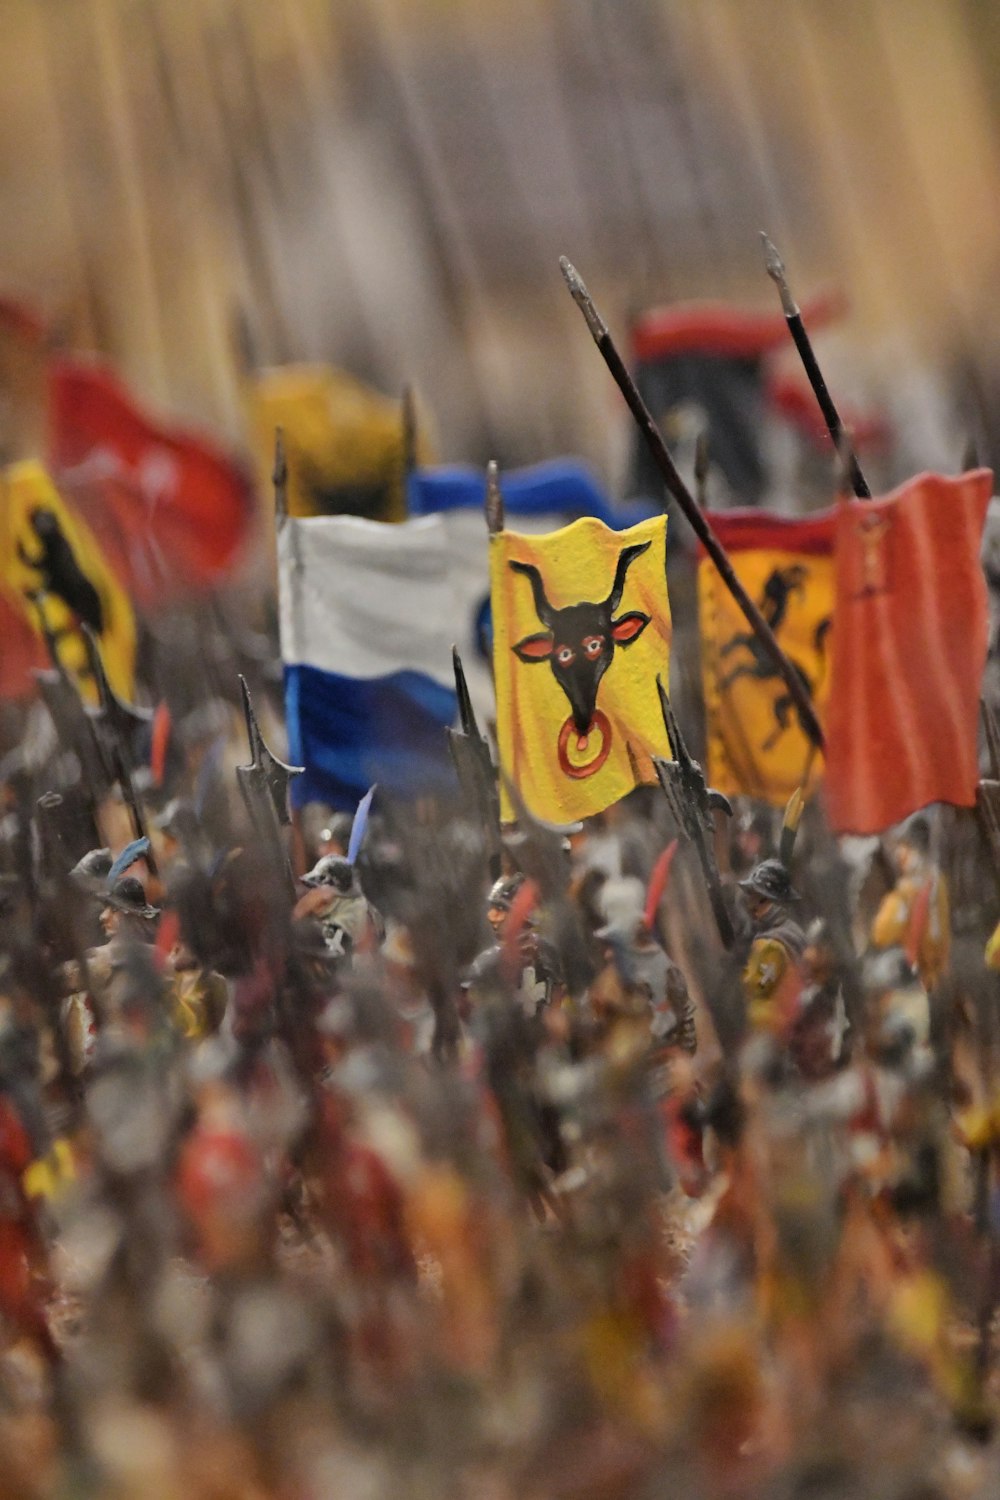 a large group of toy soldiers with flags